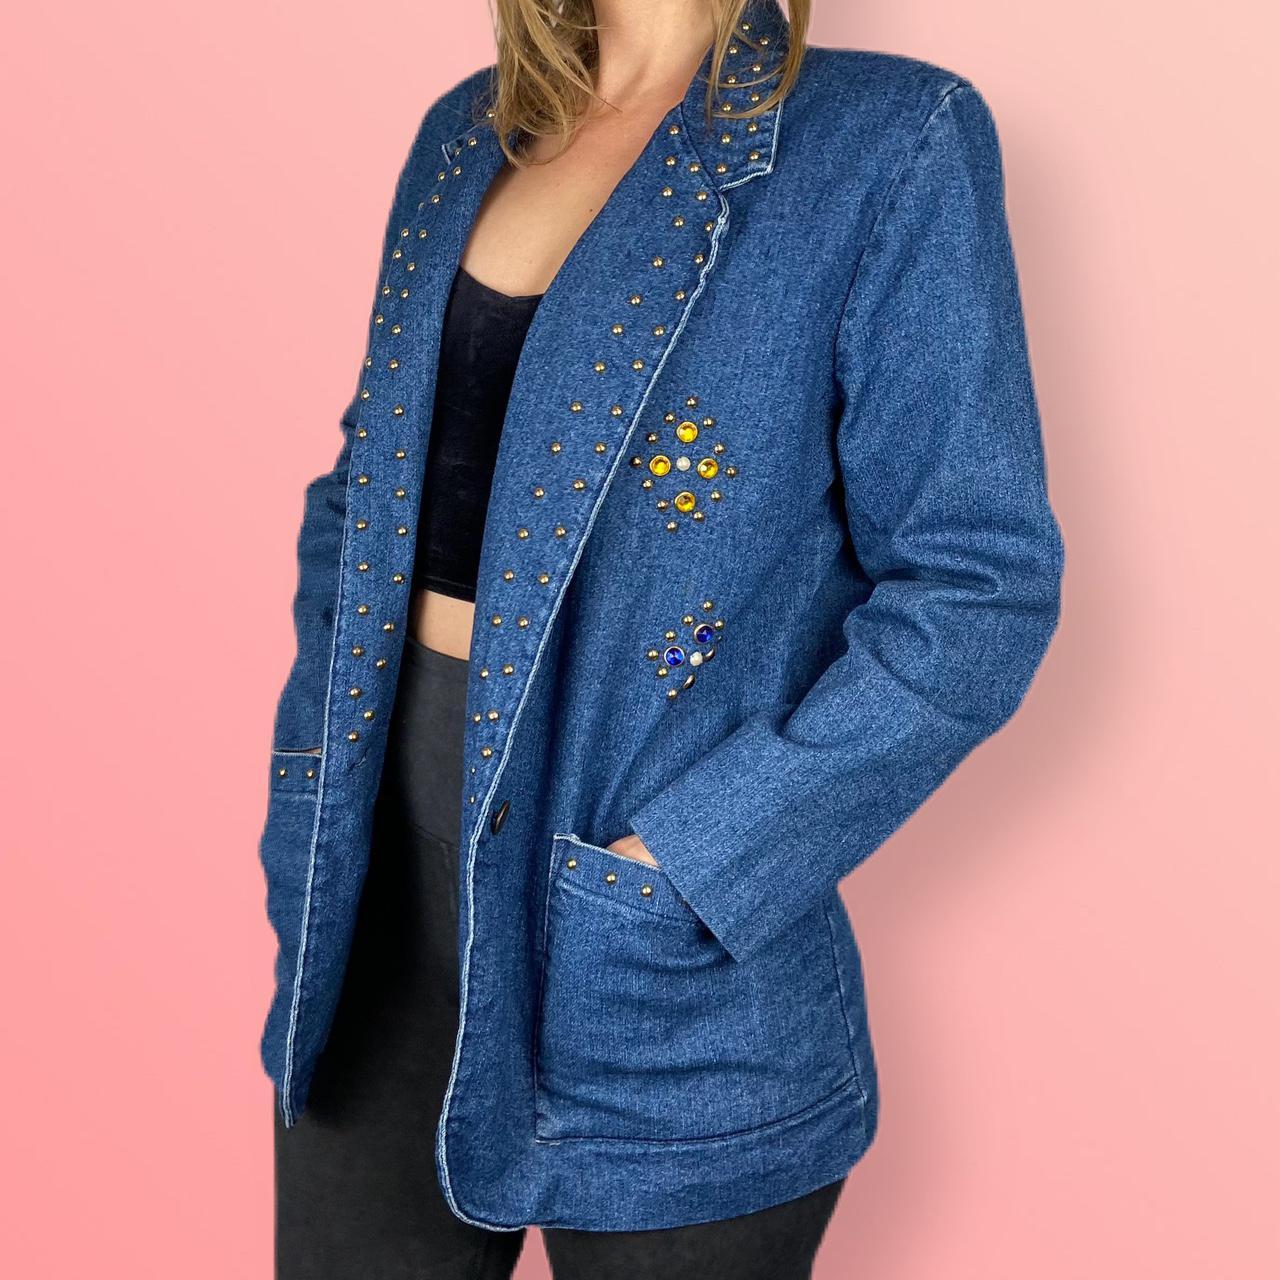 American Vintage Women's Blue and Gold Jacket (3)